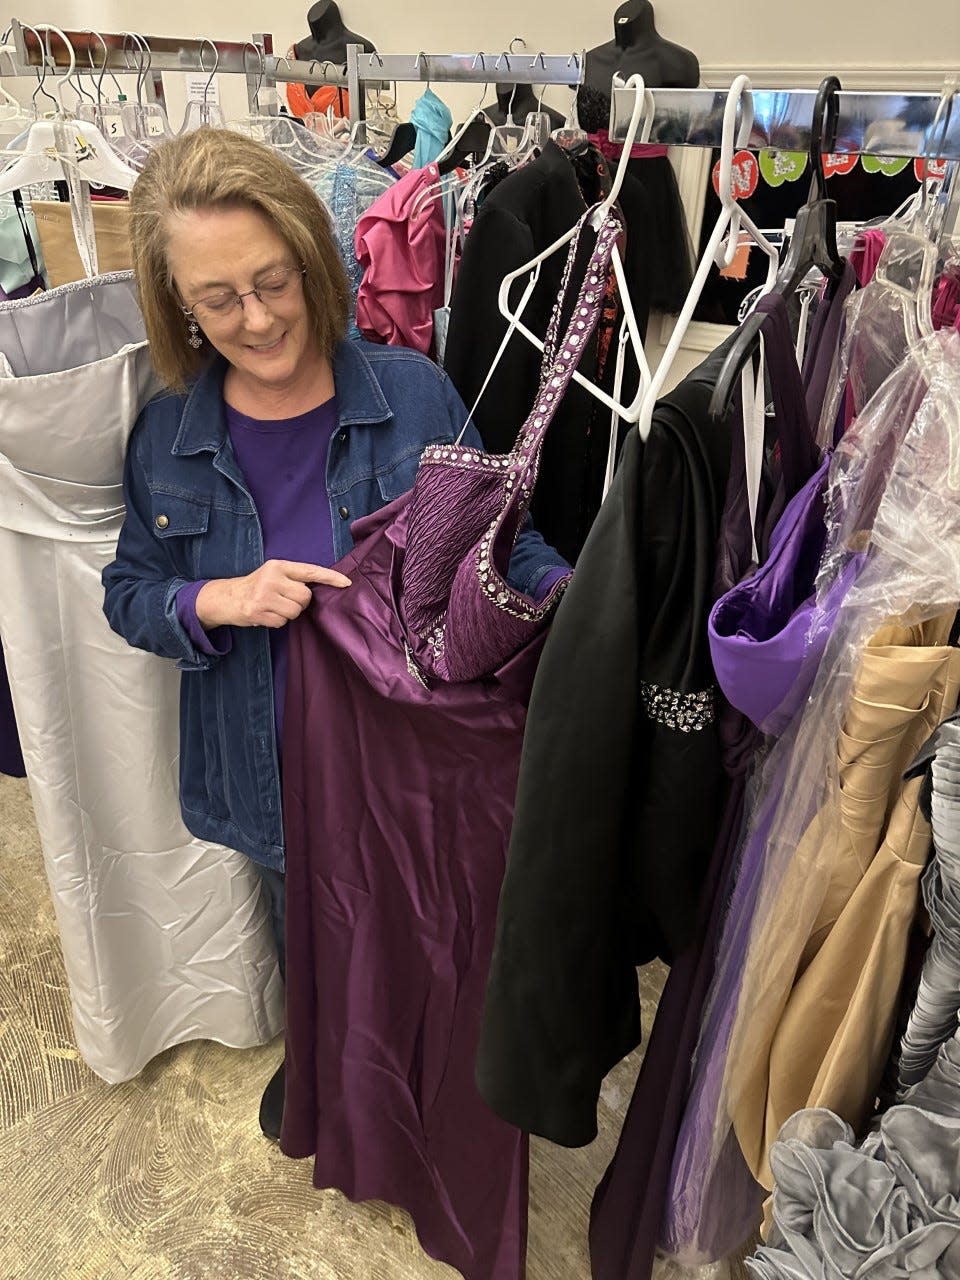 Melanie Burr displays one of the prom dresses available at the Totally Free Clothes Store. The store recently moved to a bigger location and is able to give away thousands of clothes for free each month.